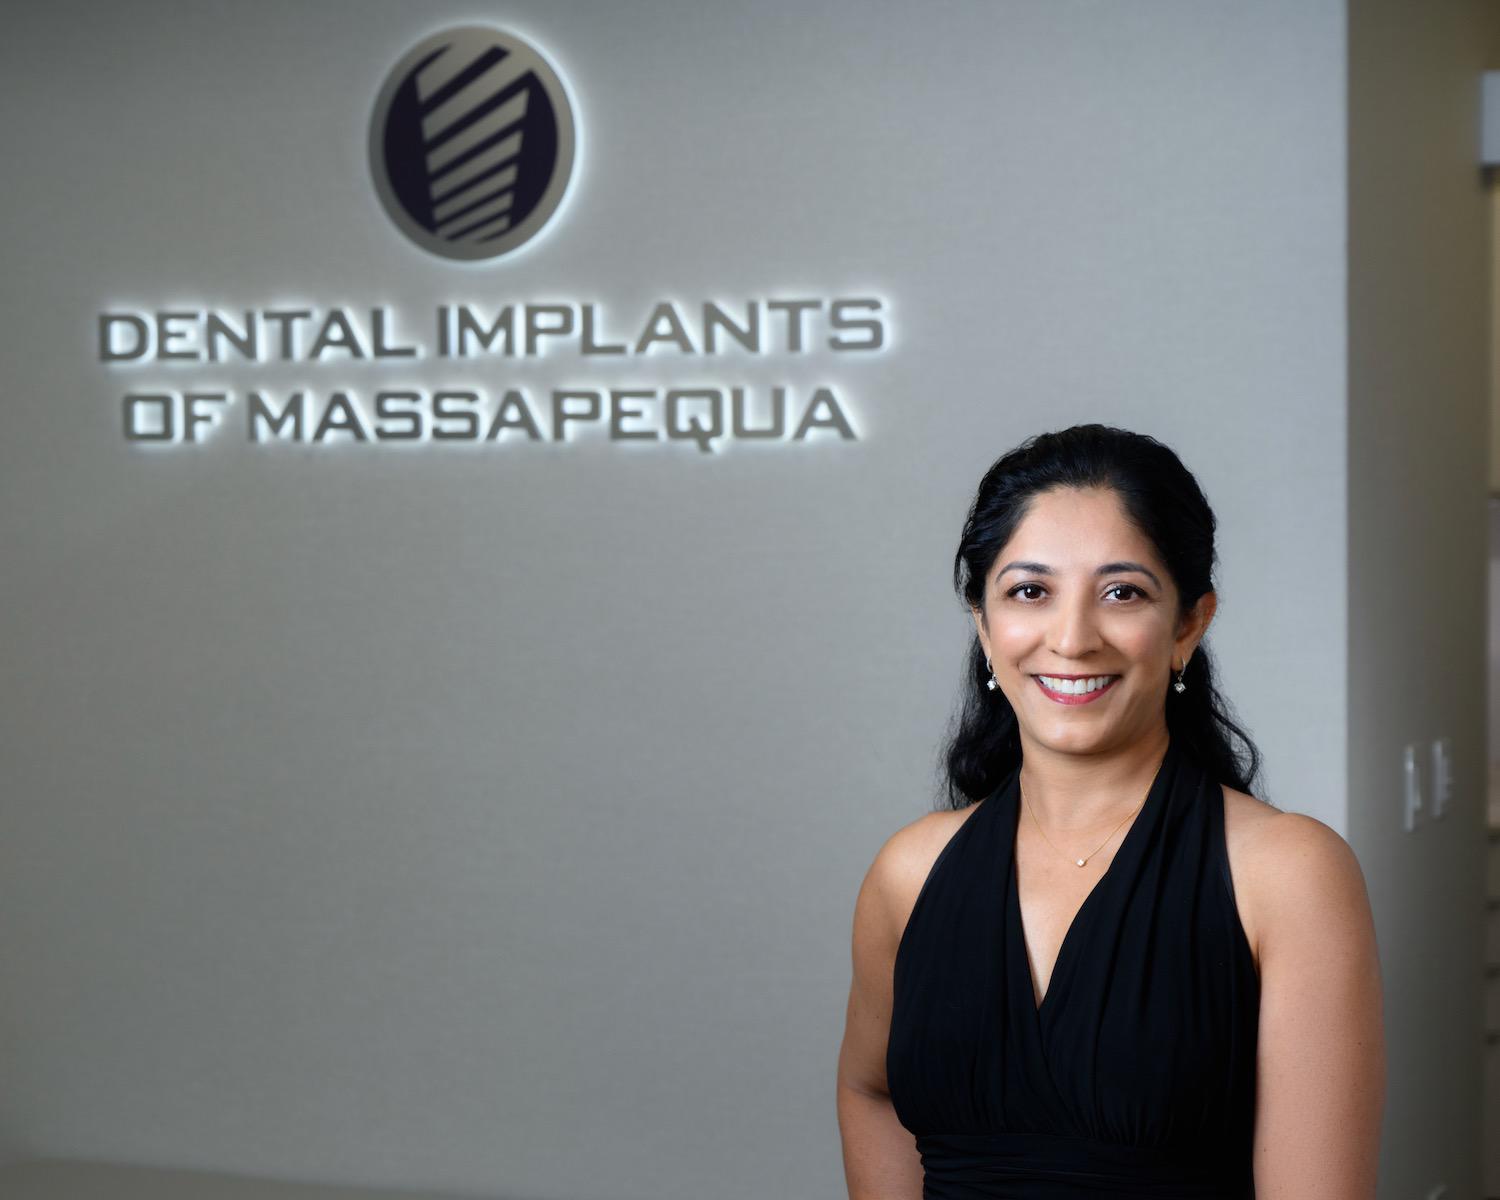 Welcome to Dental Implants and Periodontology of Massapequa! Dr. Amandeep Kaur is a highly regarded periodontist with over 10 years experience in both periodontal care and dental implant placement. Dr. Kaur knows that it is imperative to the success of her practice to surround herself with the best office and support staff in dentistry. Her team is comprised of highly trained, caring and compassionate clinicians along with a professional, educated office and support staff. At our practice, you will receive the highest quality dental care.We view it as our mission to educate our patients about all of their oral health care options and to help guide them to choose a treatment plan that is most suitable and appropriate for their needs. We know that many people may feel anxious about coming to the periodontist, so it is our goal to make your visit with us as pain and anxiety-free as possible. We hope this translates to a wonderful experience at Dental Implants and Periodontology of Massapequa.